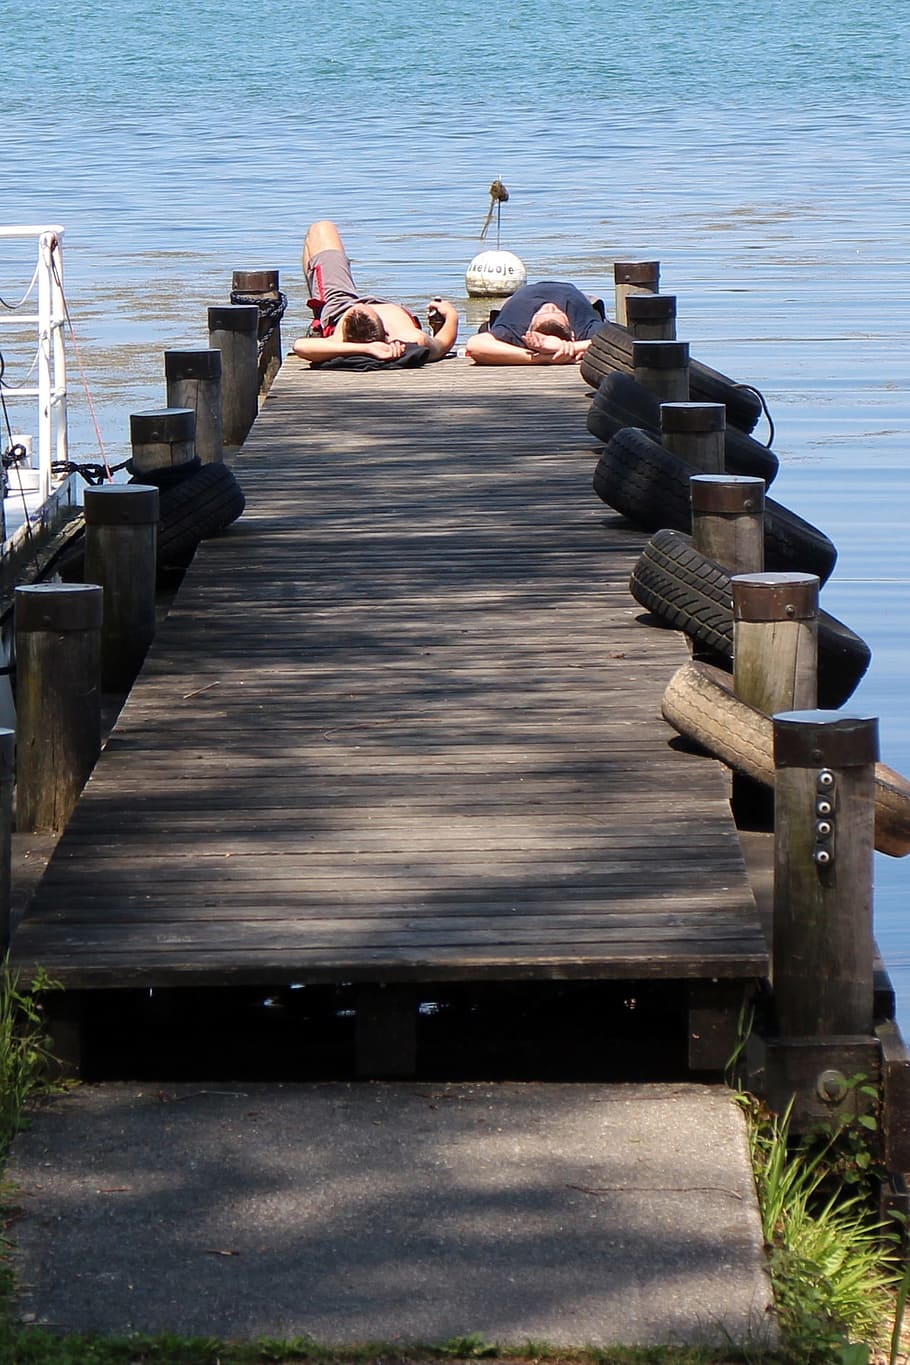 boardwalk, web, rest, chill out, relax, personal, human, leisure, nature, water